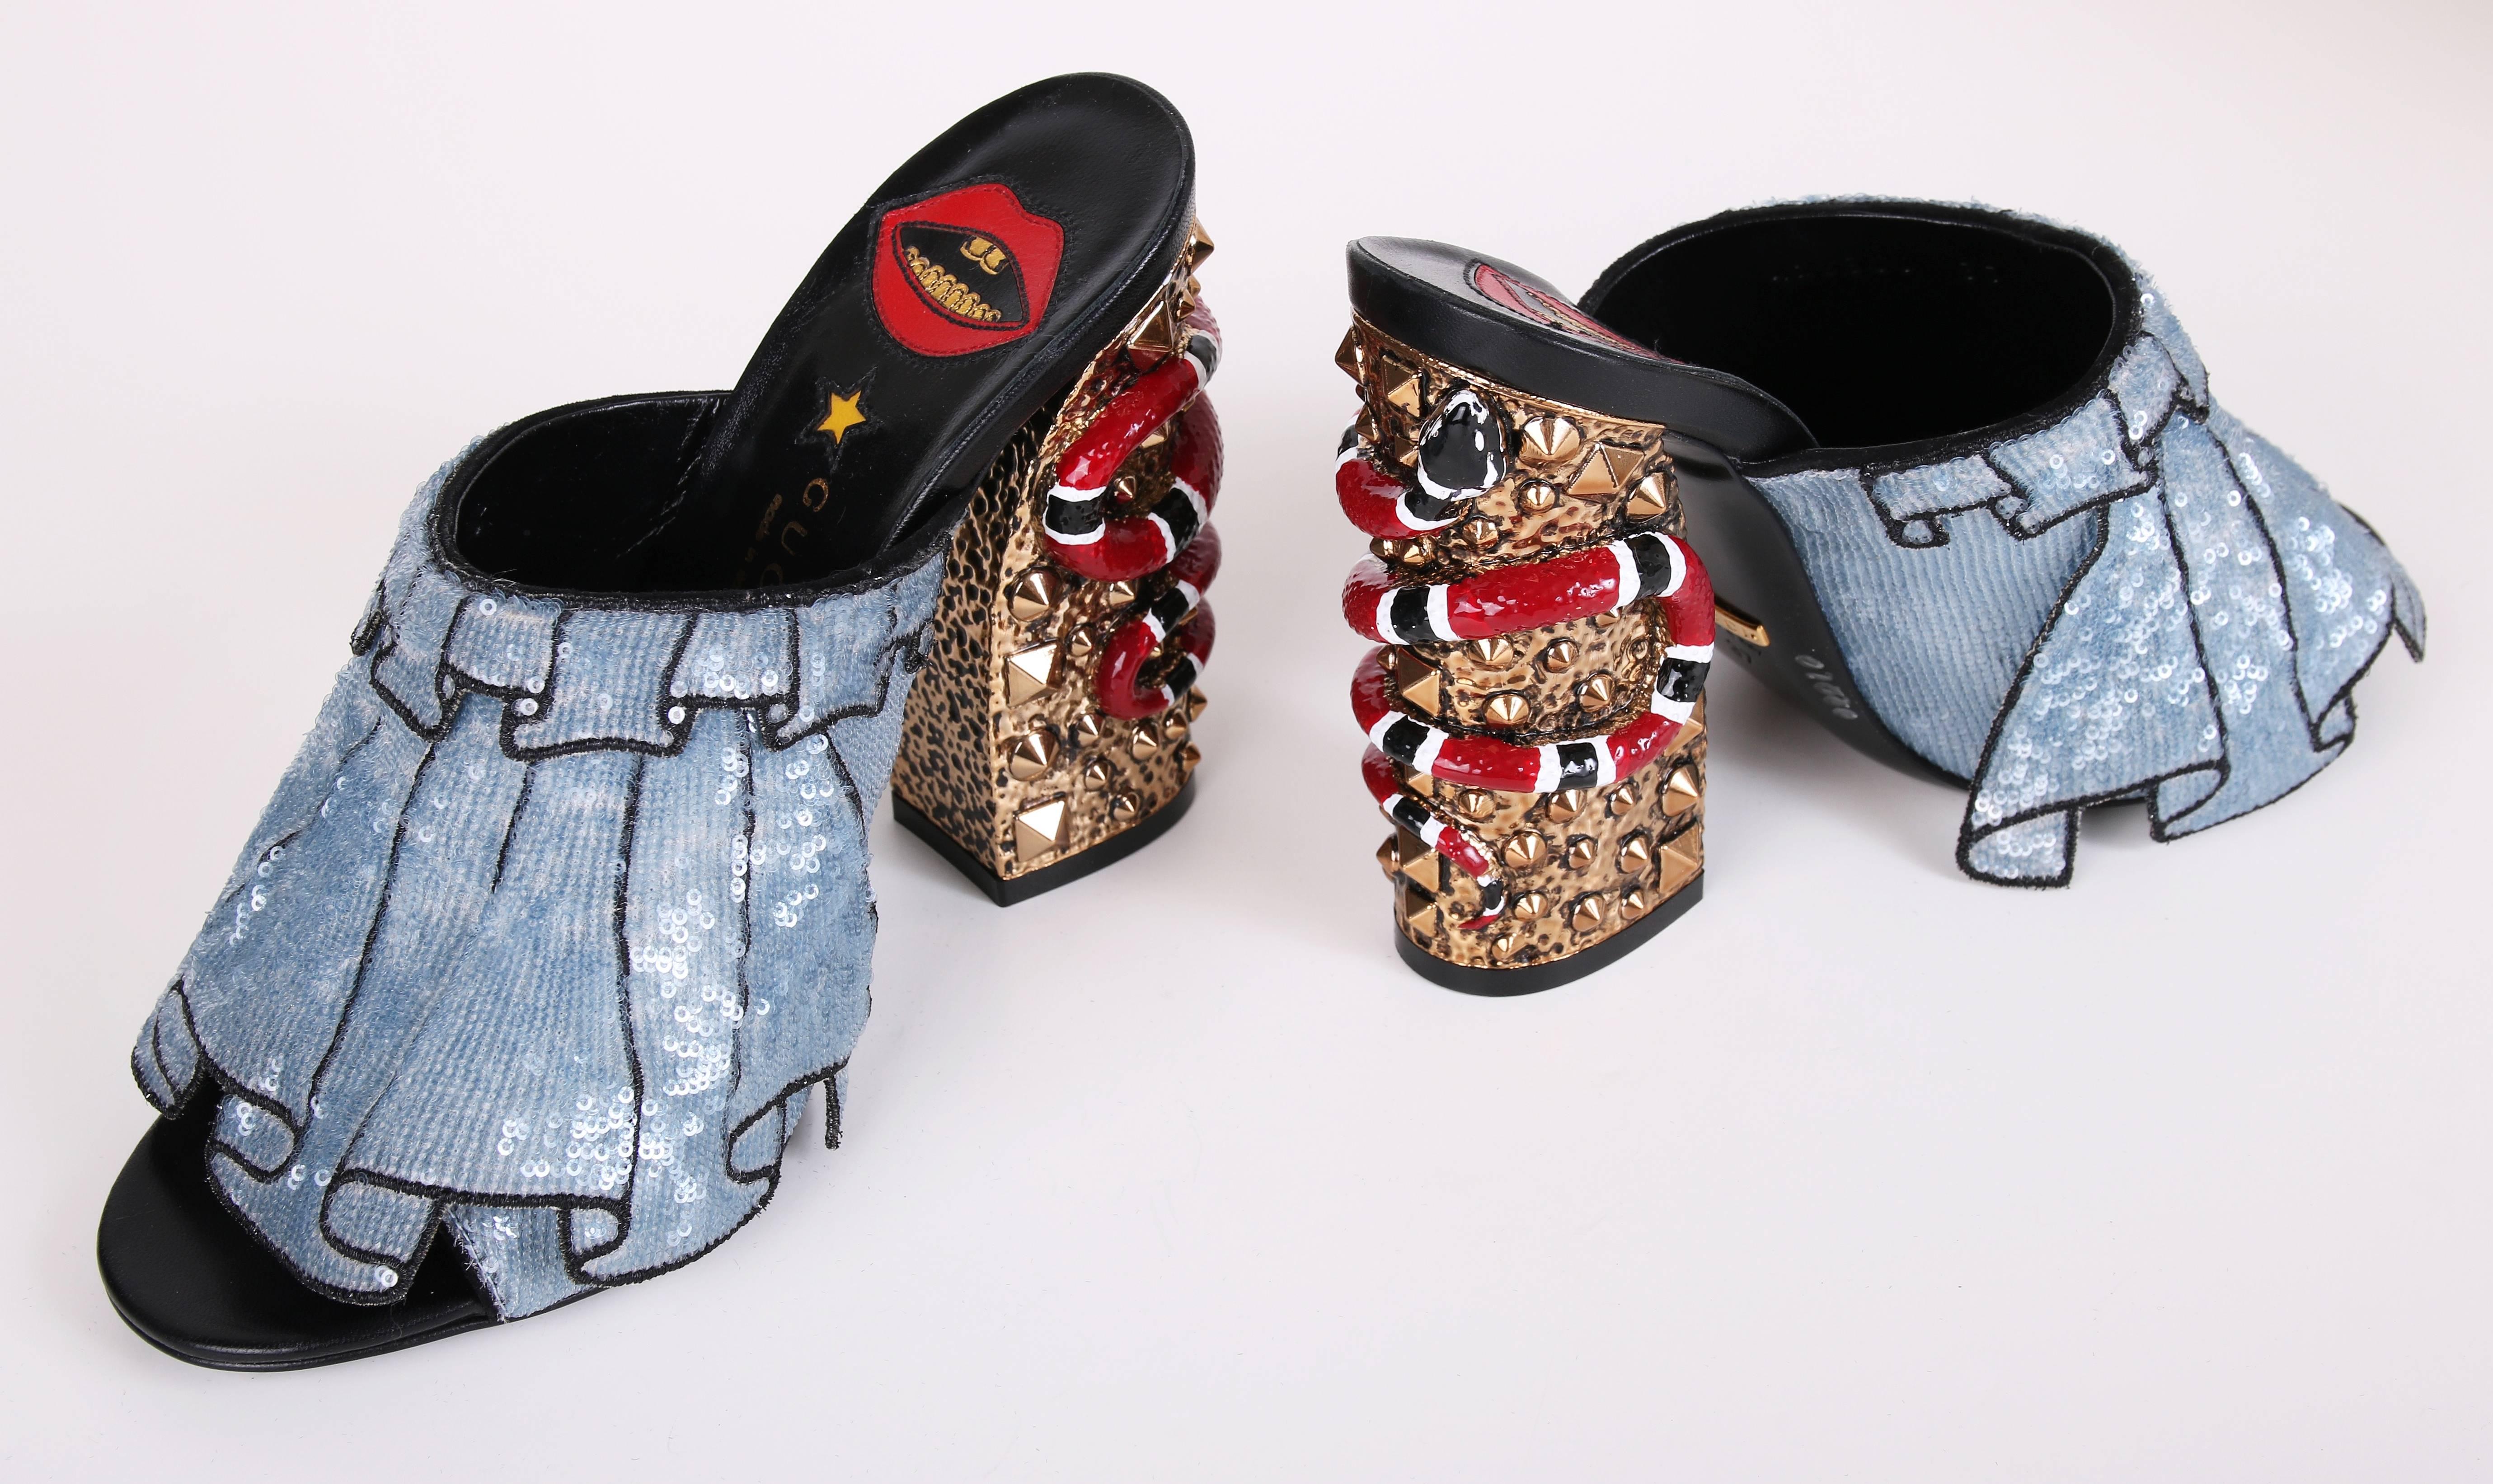 Spring 2016 Gucci trompe l'oeil light blue sequined Owen ruffles block-heel mules with snakes at heel. Heel is made of hammered gold tone metal and gold studs. Shoes have never been worn - in perfect condition. Size 37